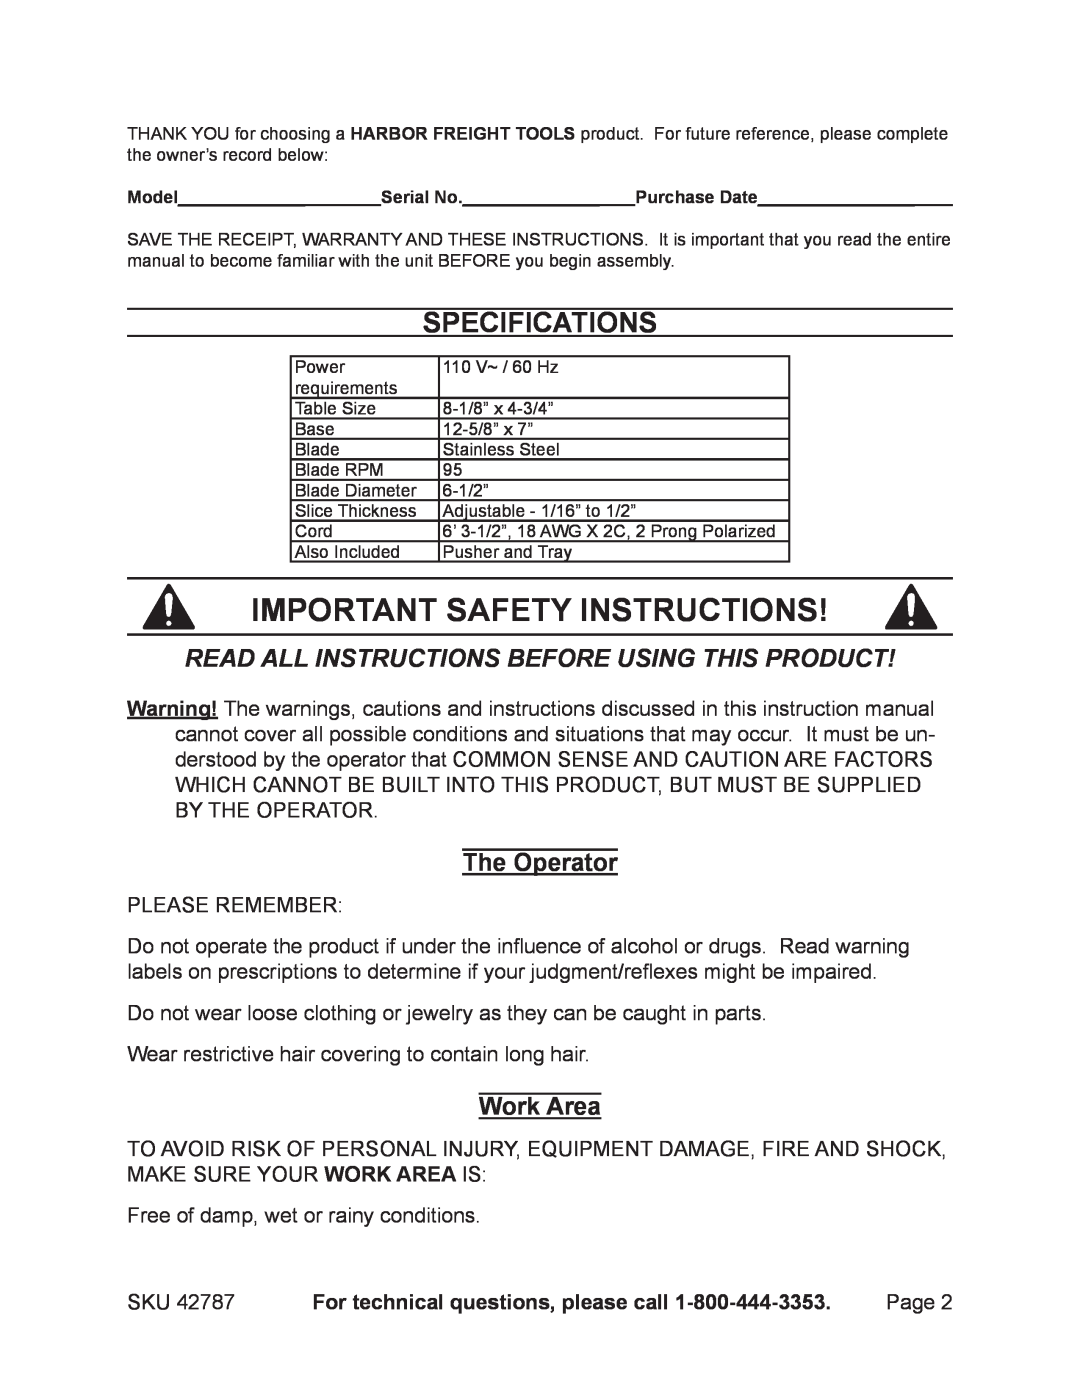 Harbor Freight Tools 42787 operating instructions Important safety instructions, Specifications, The Operator, Work Area 